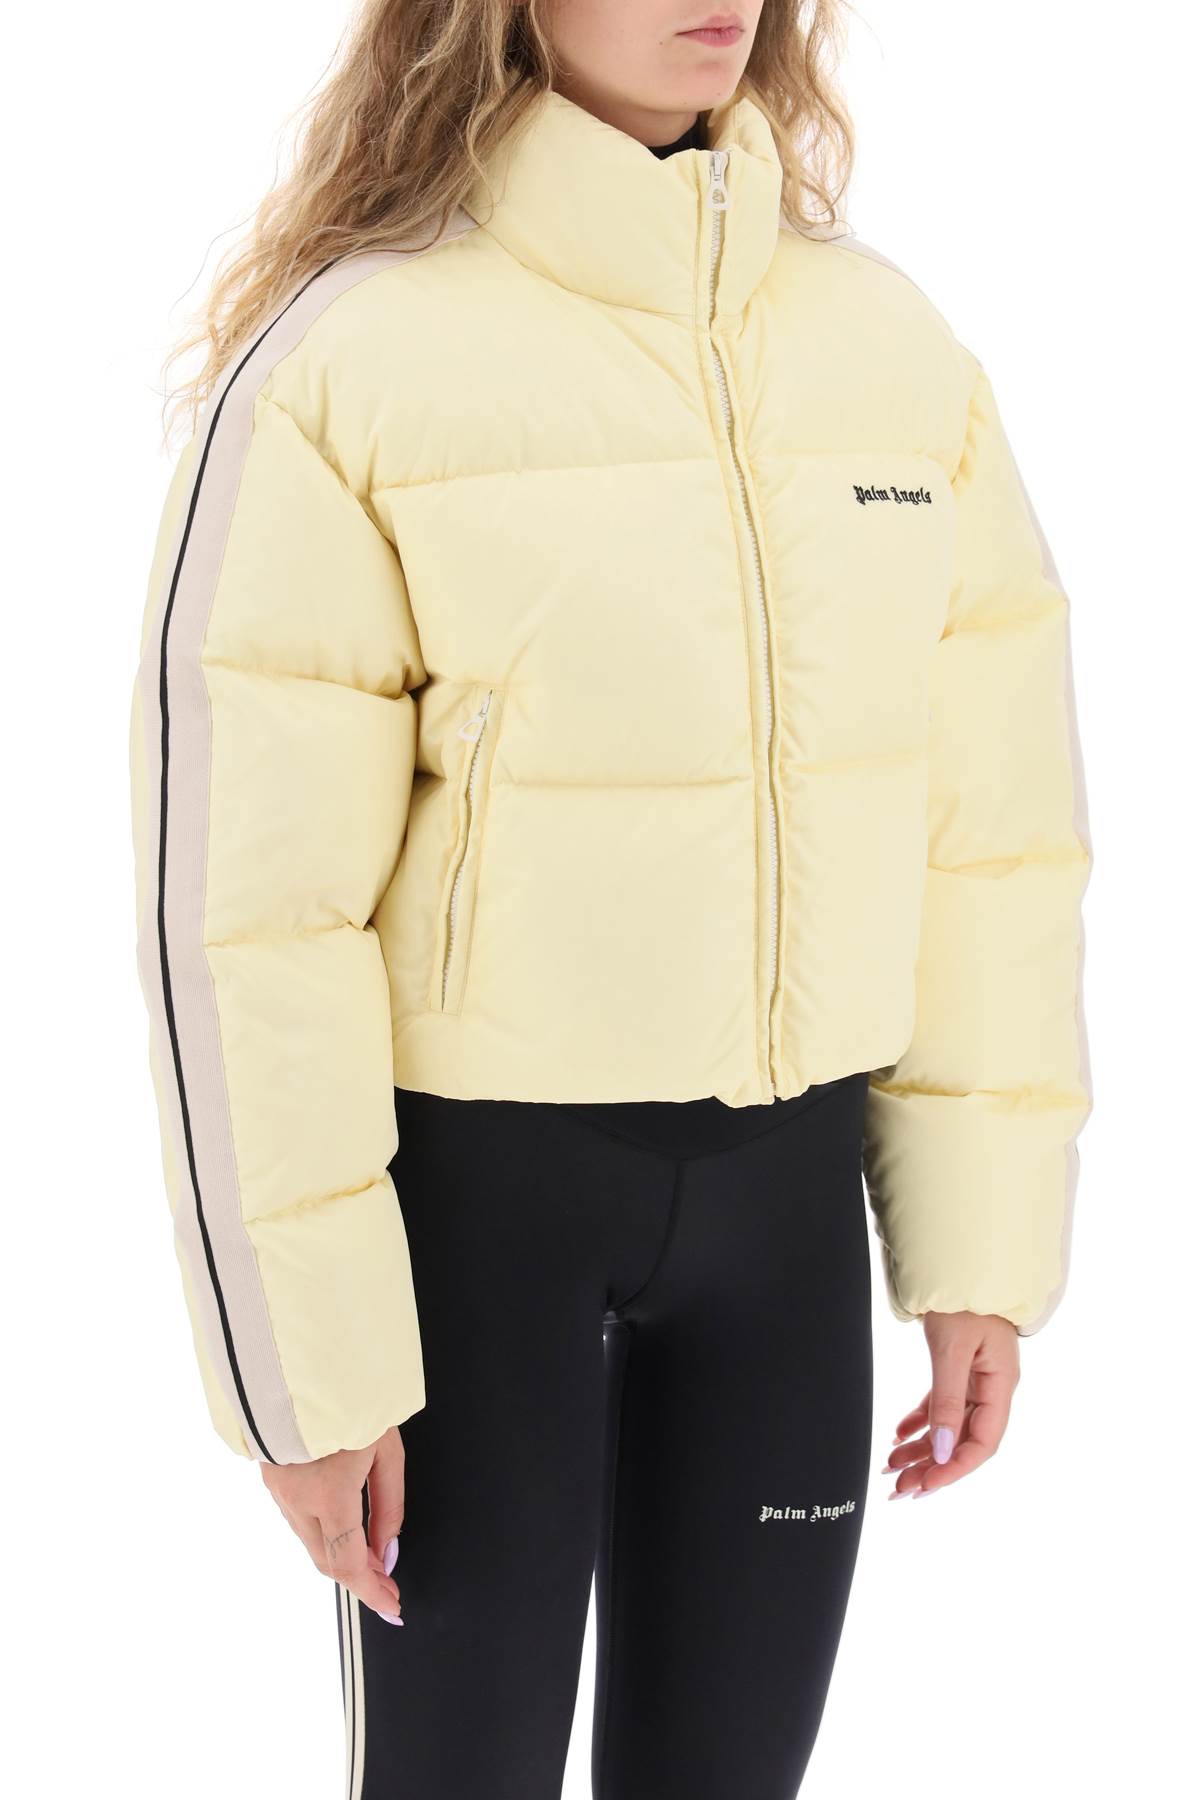 Shop Palm Angels Cropped Puffer Jacket With Bands On Sleeves In Butter Black (yellow)